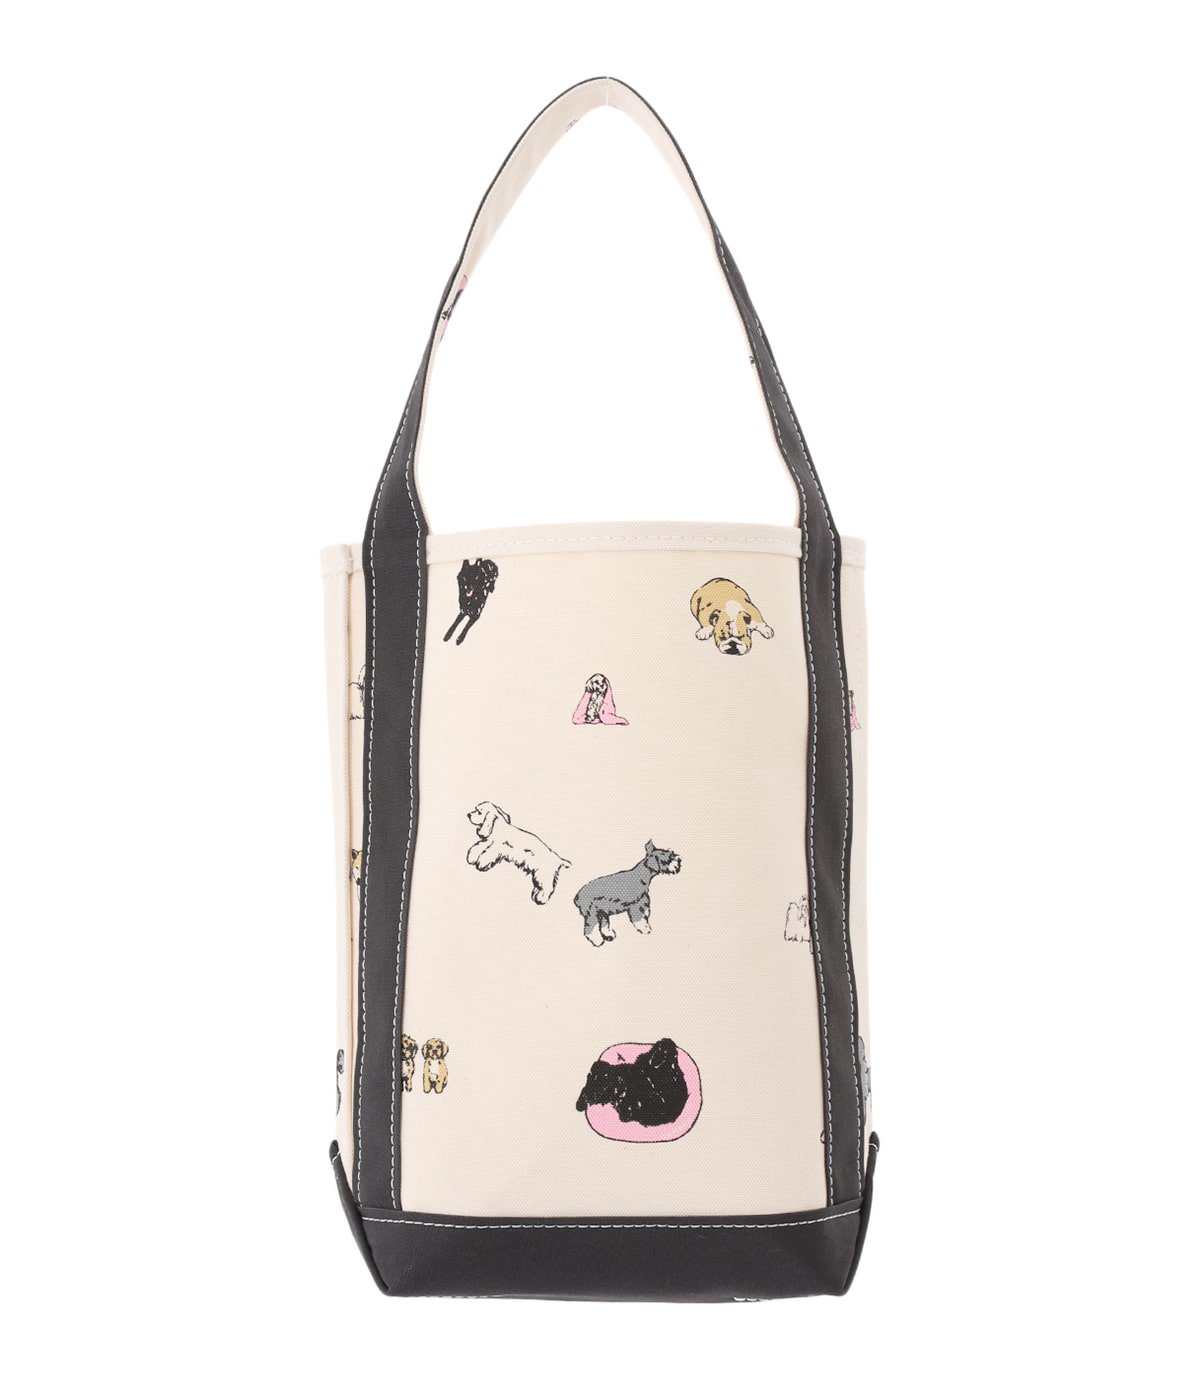 BAGUETTE TOTE SMALL PRINT -DOG- | TEMBEA(テンベア) / バッグ トート